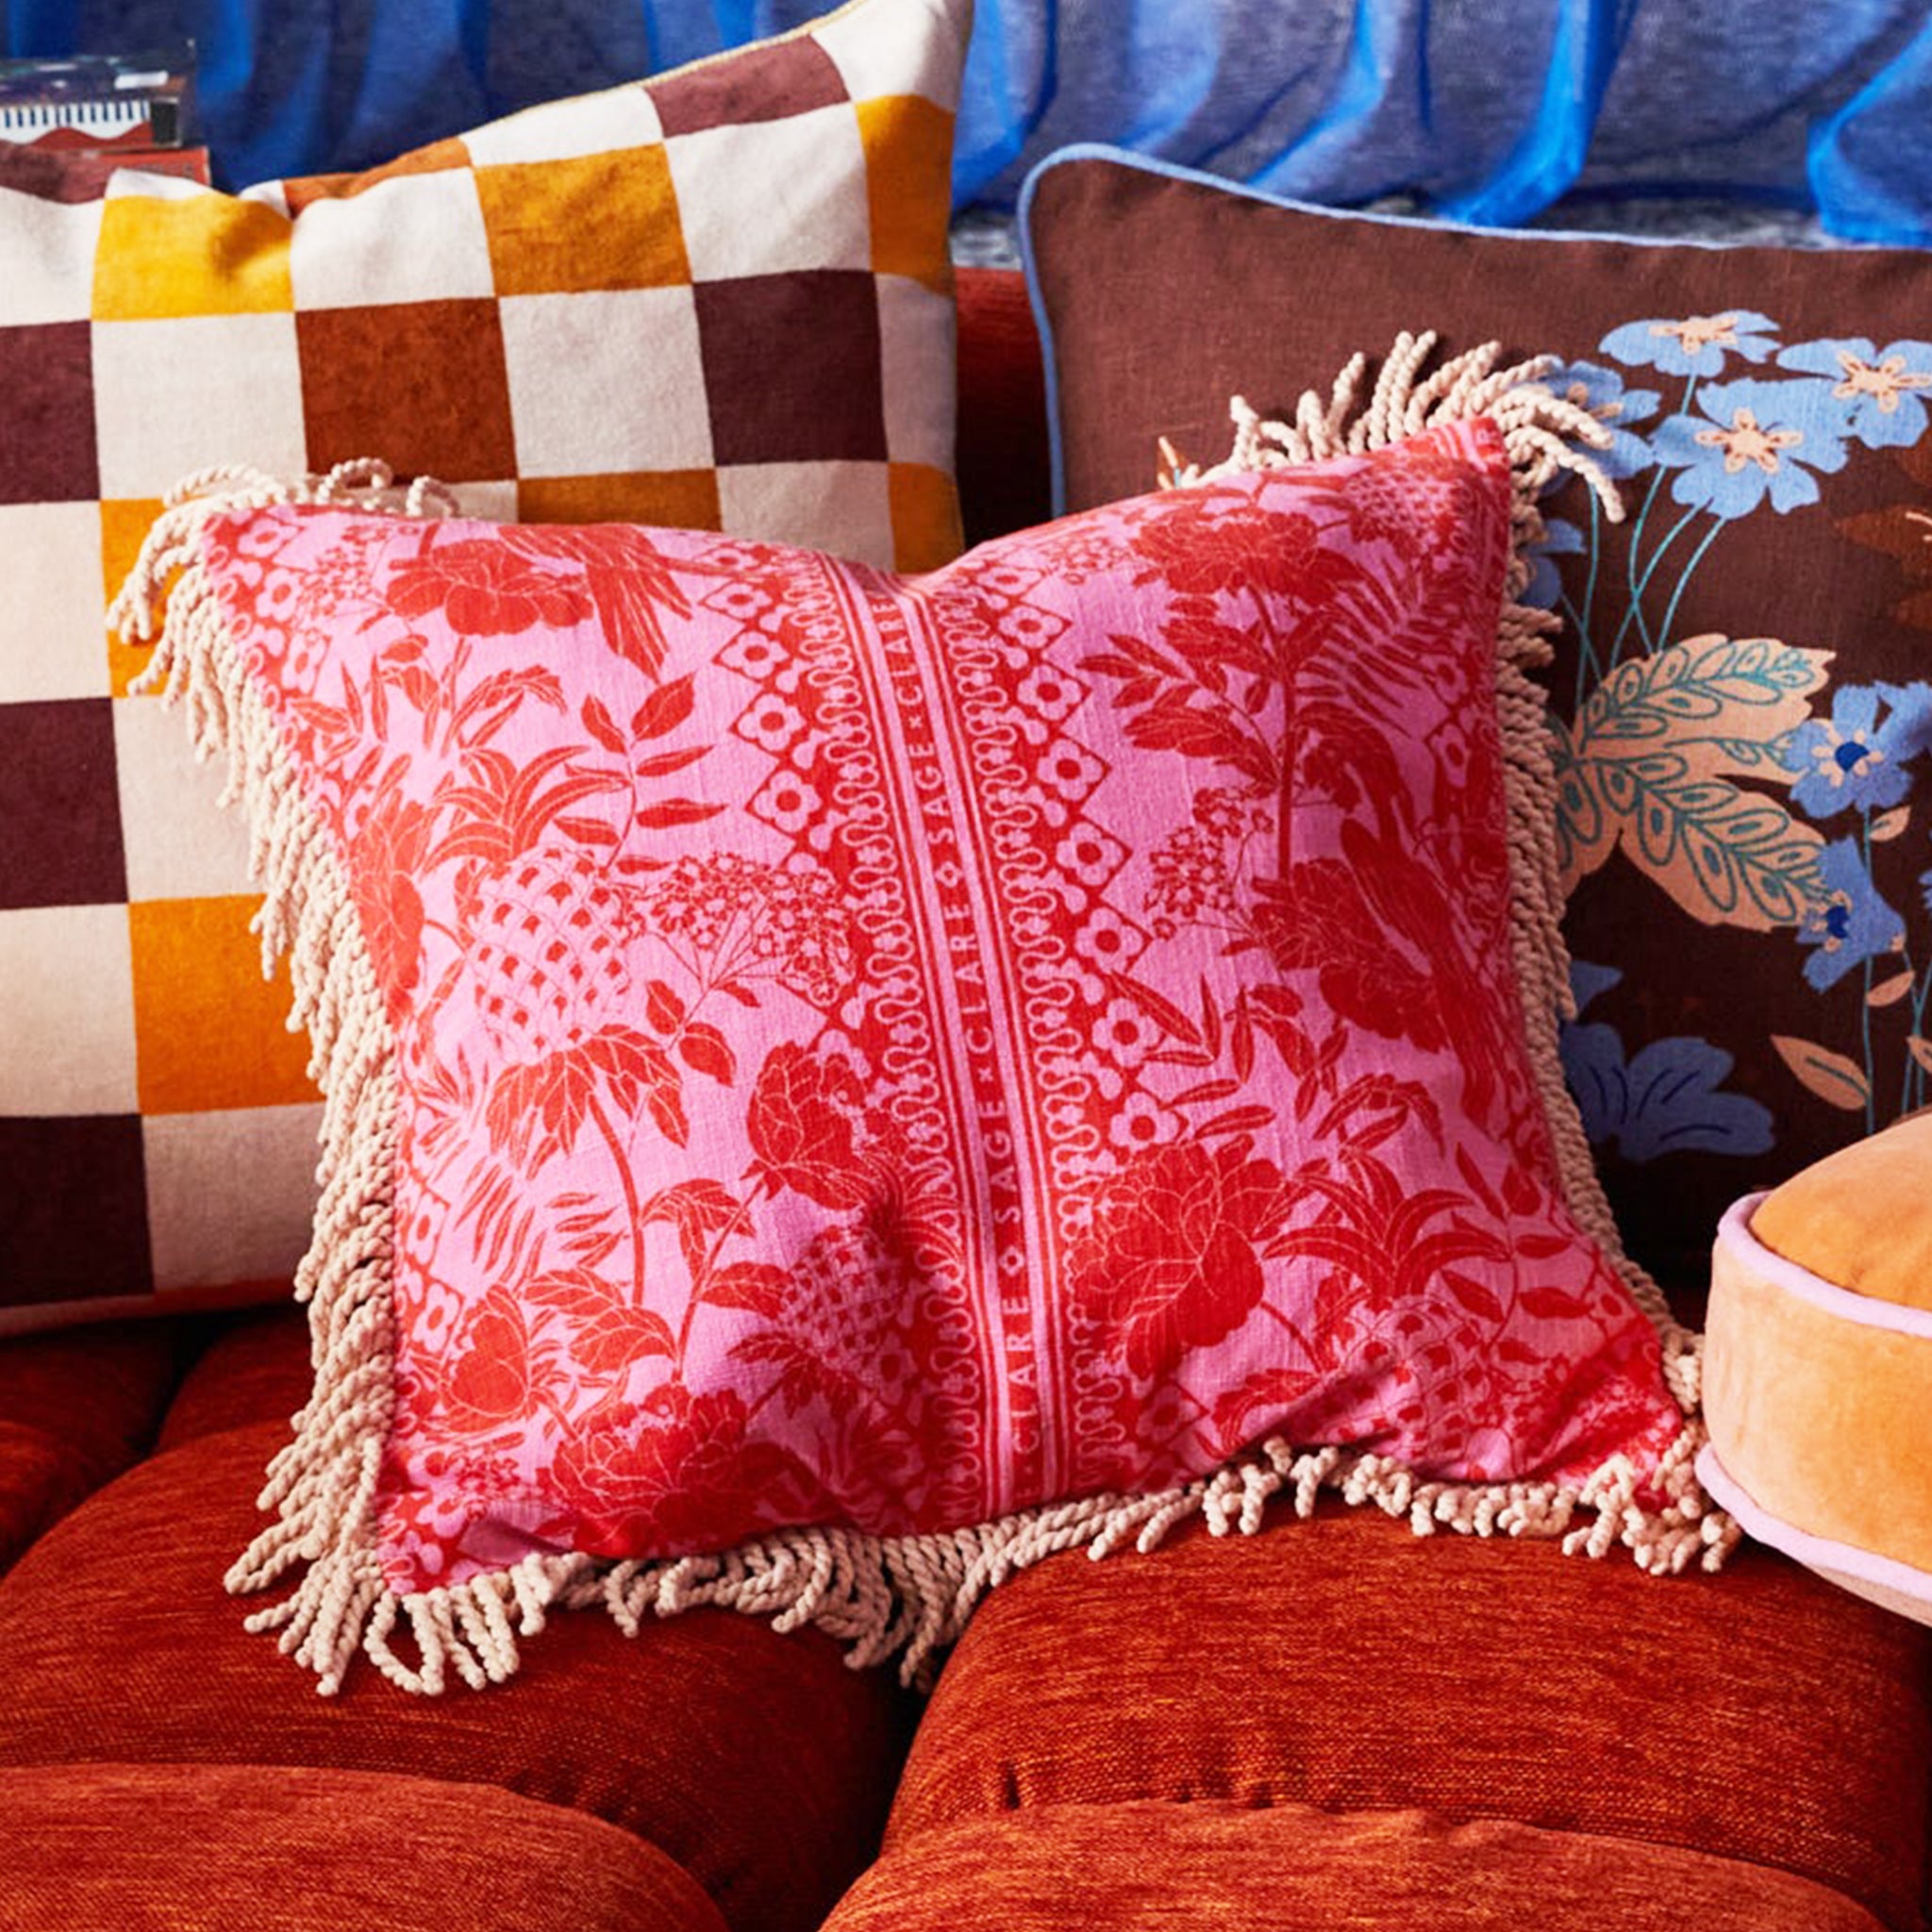 A pink and orange tropical print pillow with a. tassel edge.